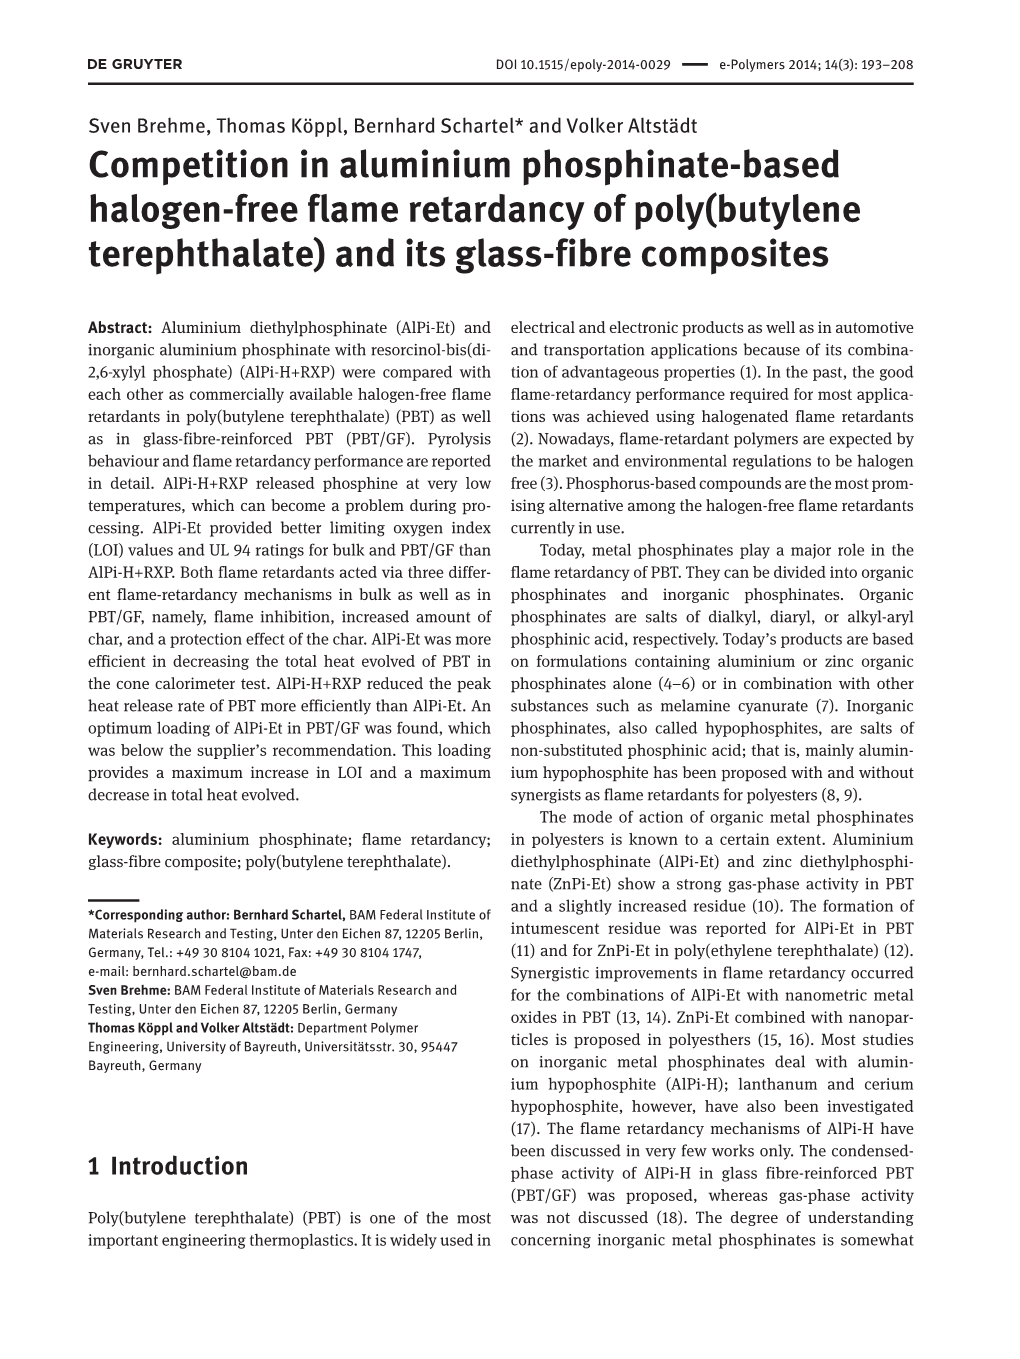 Competition in Aluminium Phosphinate-Based Halogen-Free Flame Retardancy of Poly(Butylene Terephthalate) and Its Glass-Fibre Composites